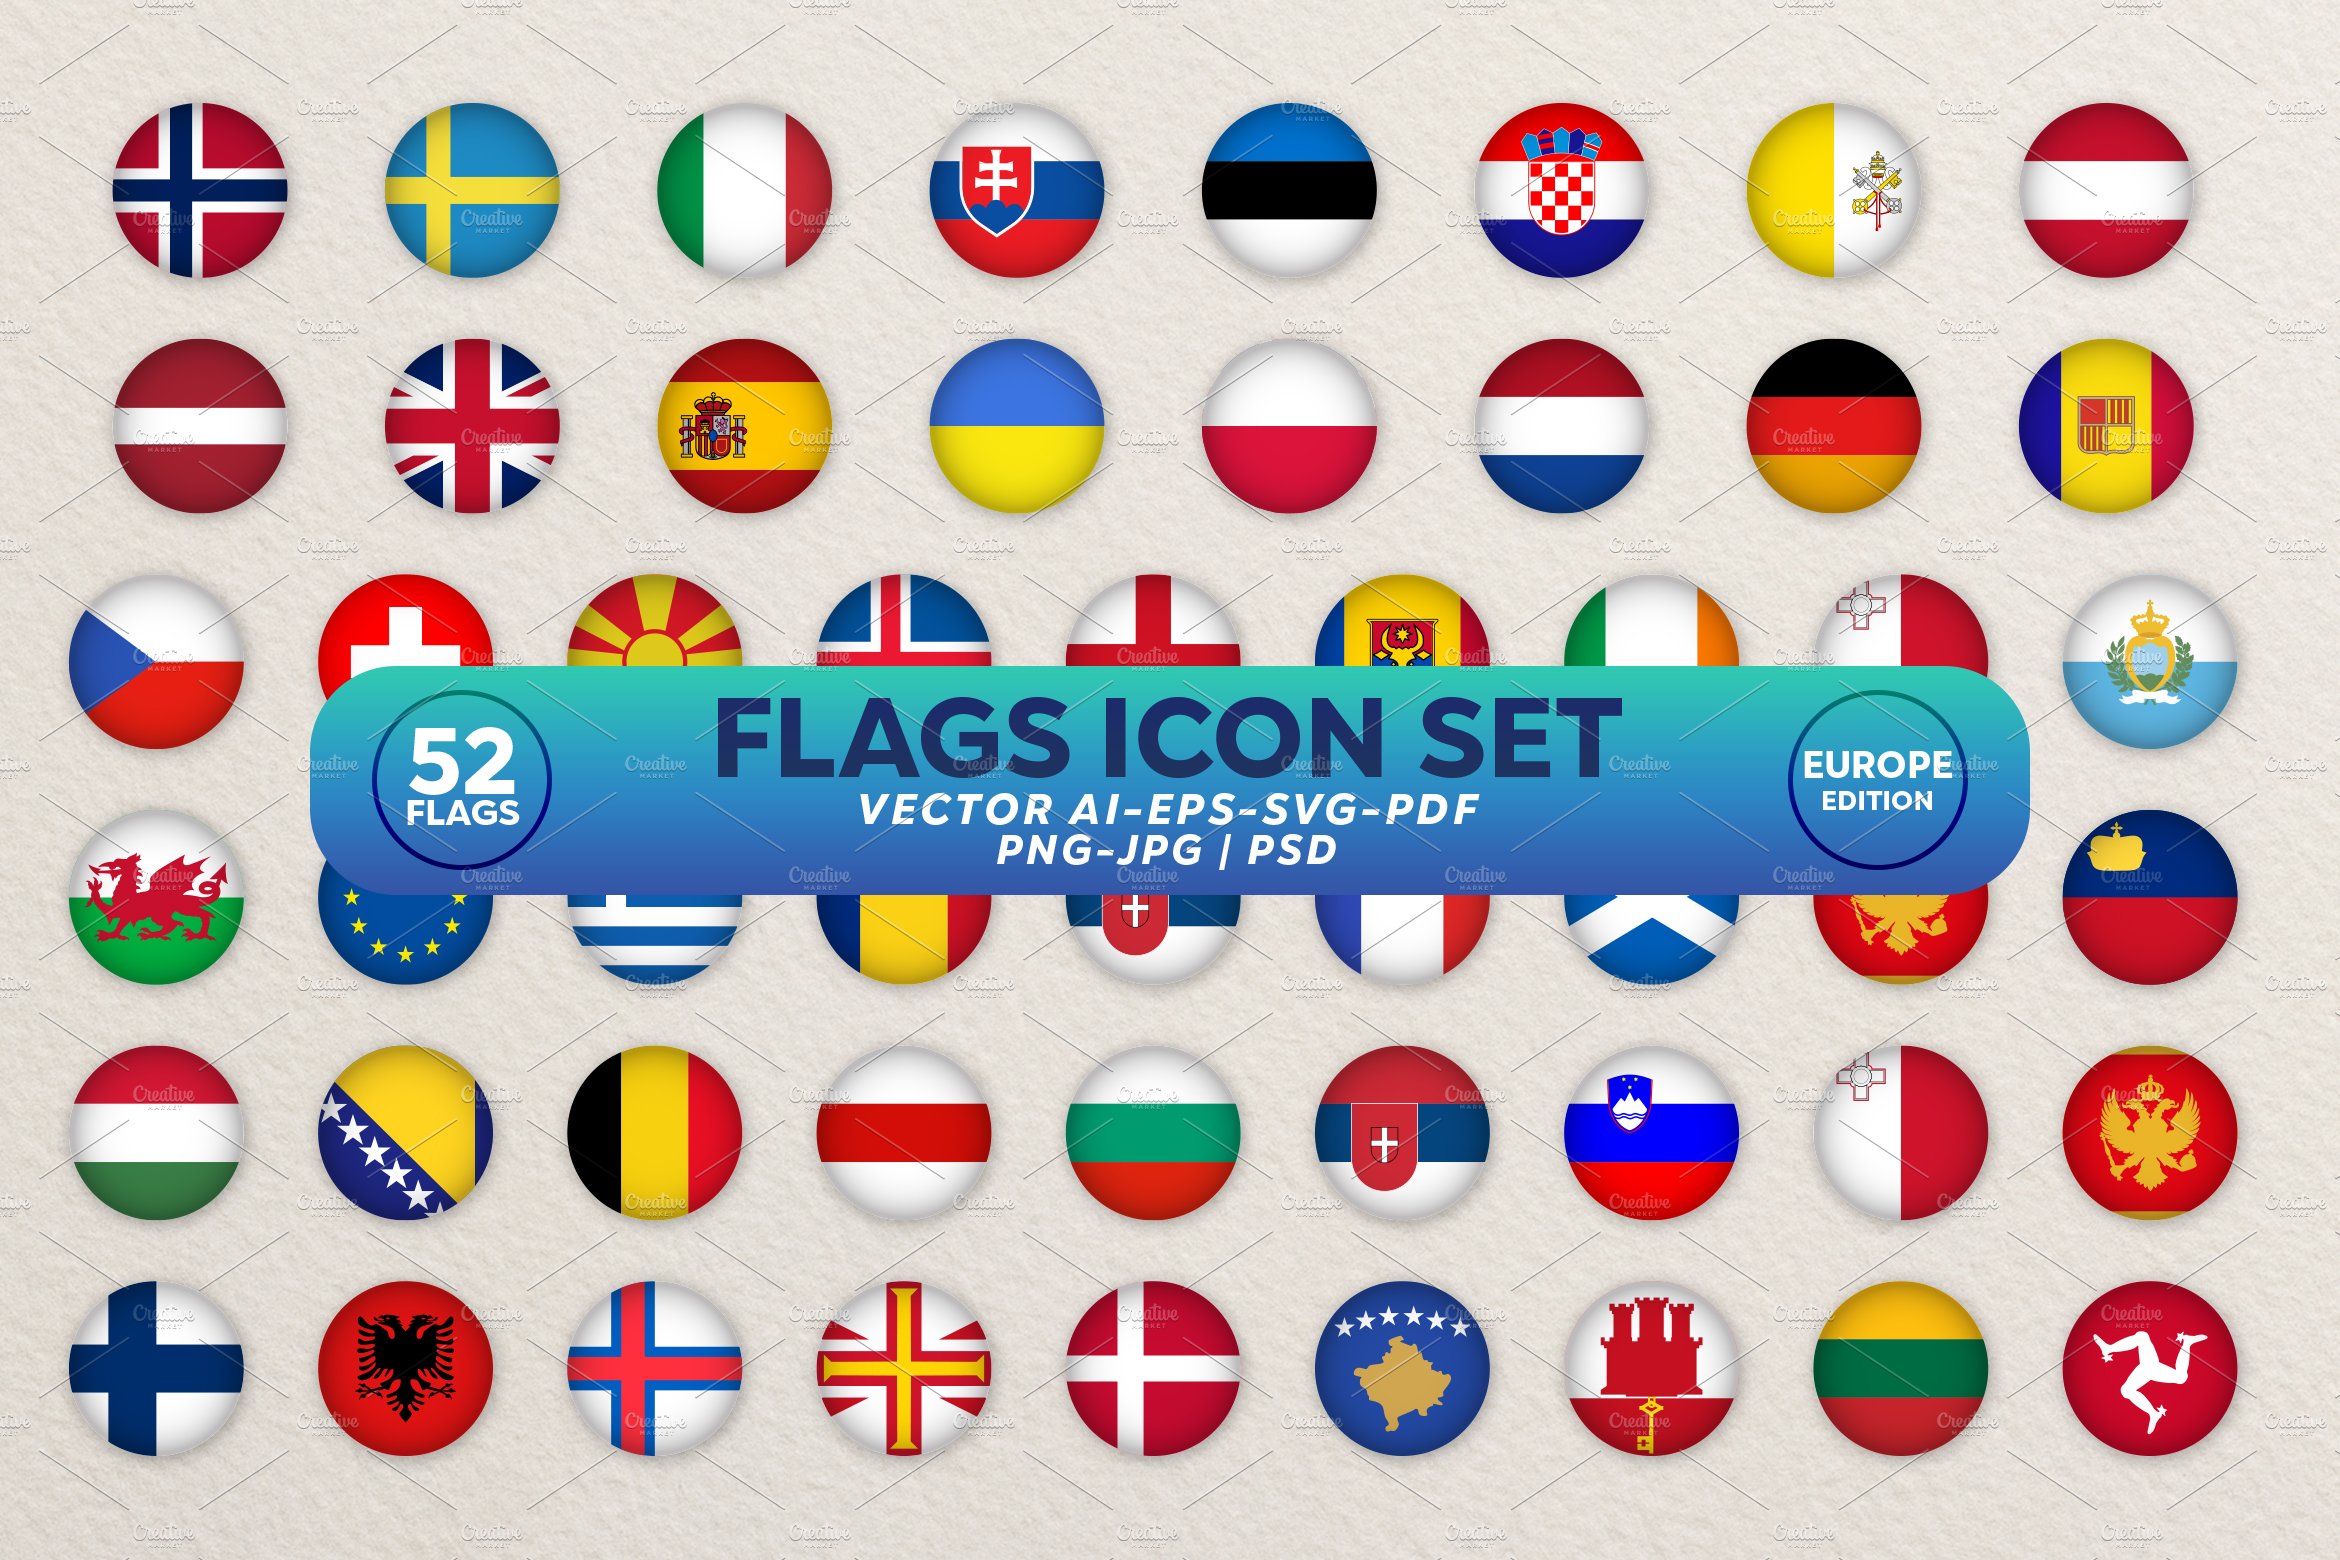 Europe Flag Icons | Circled Flags cover image.